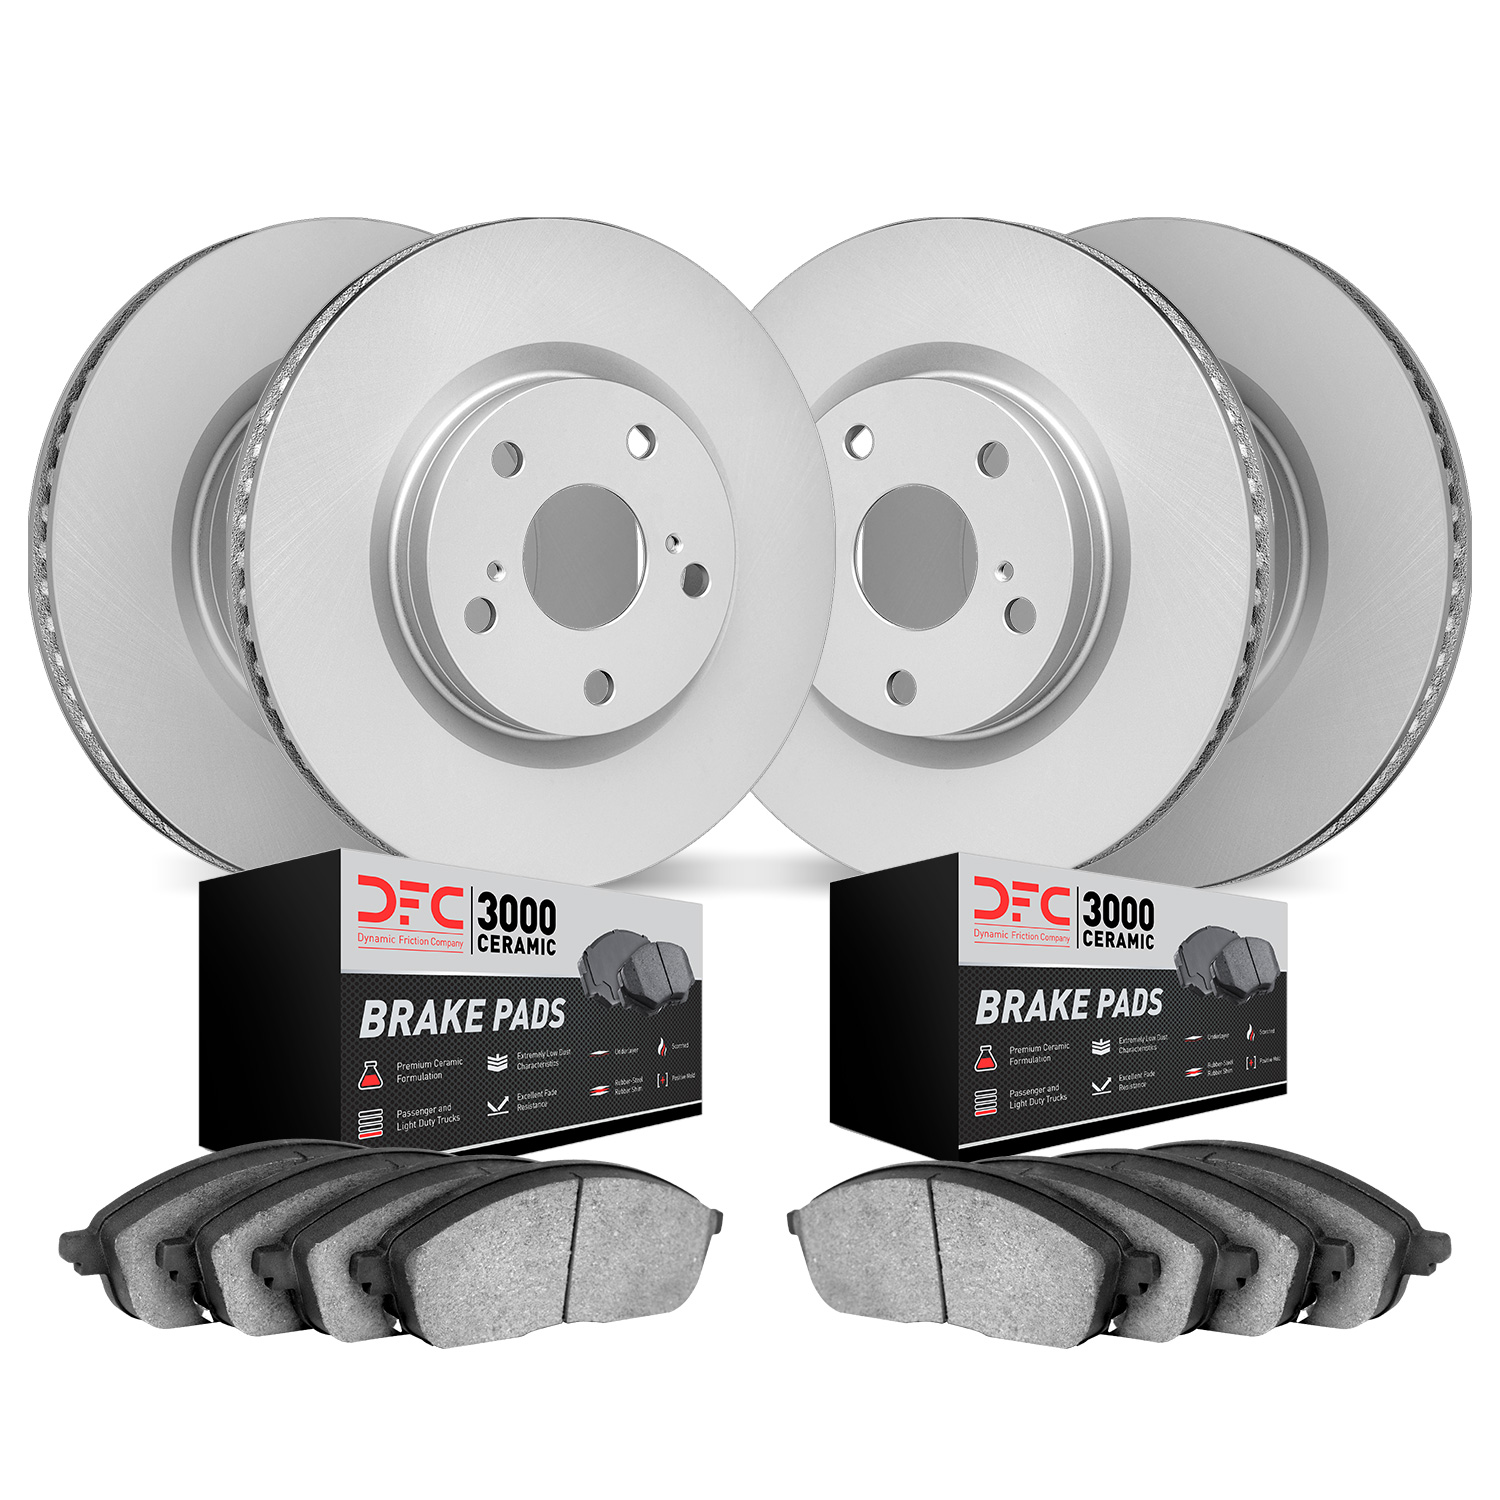 4304-67034 Geospec Brake Rotors with 3000-Series Ceramic Brake Pads Kit, 2008-2015 Infiniti/Nissan, Position: Front and Rear